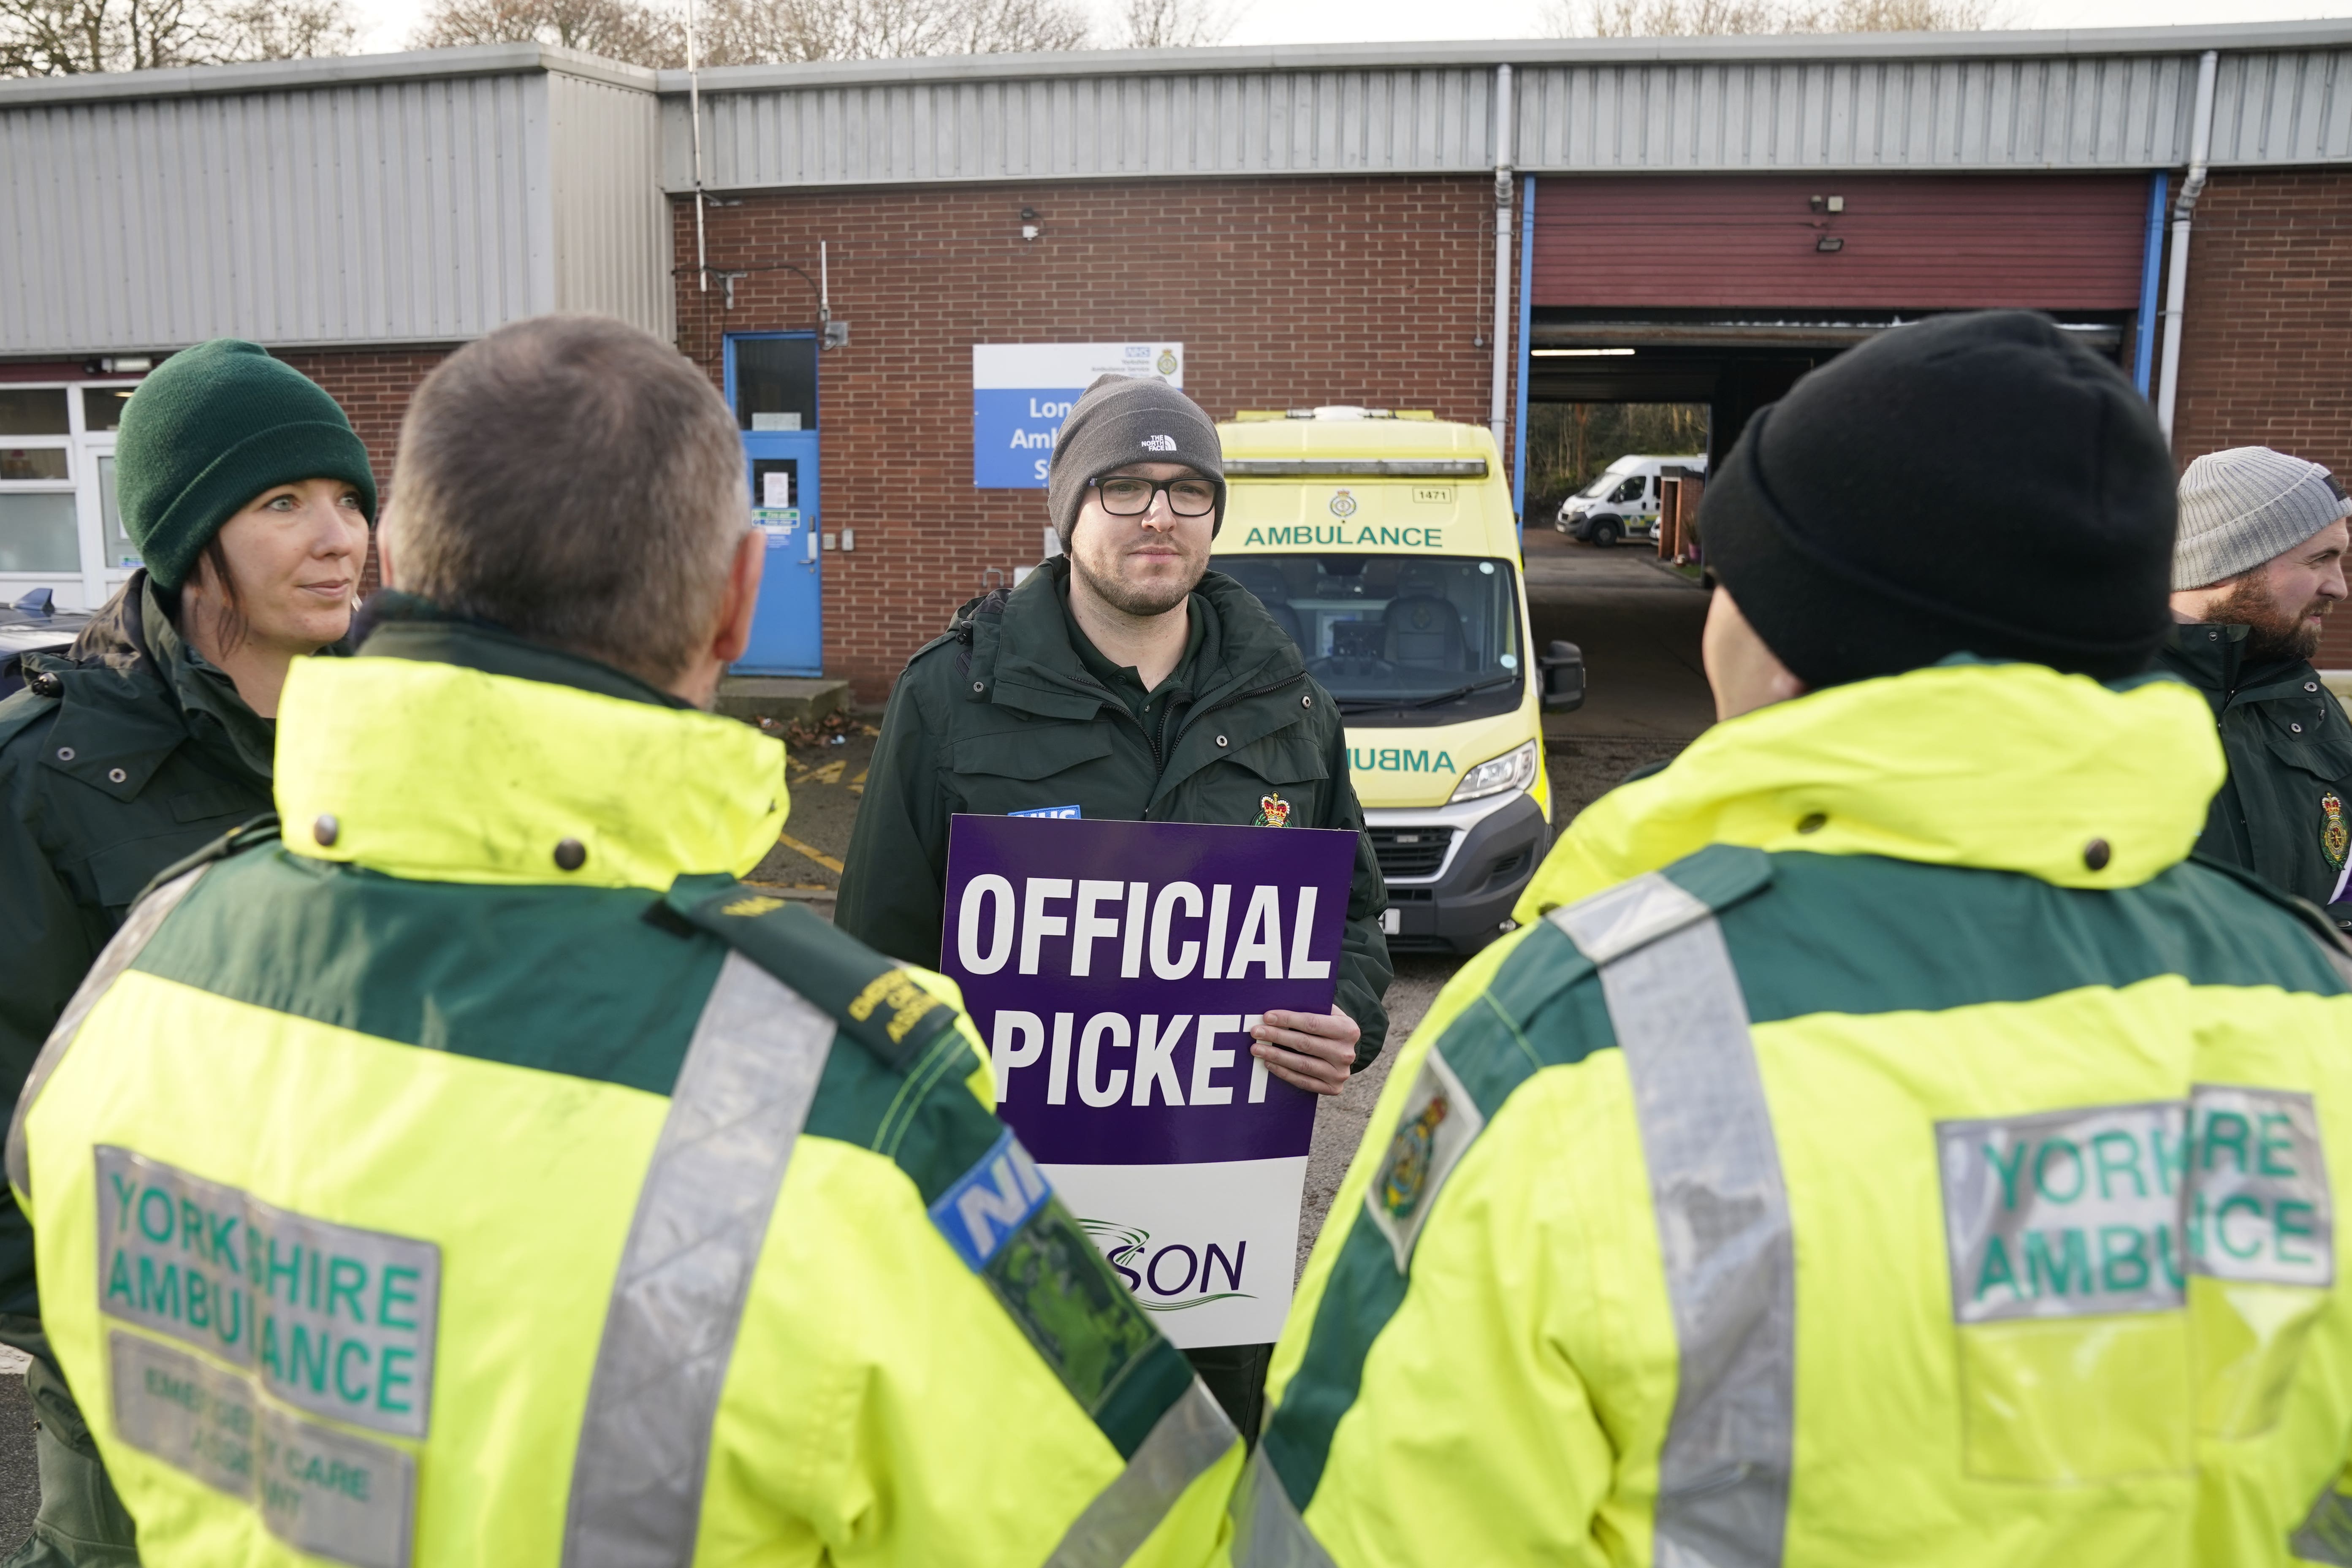 Ambulance workers on the picket line outside Longley ambulance station in Sheffield (Danny Lawson/PA)